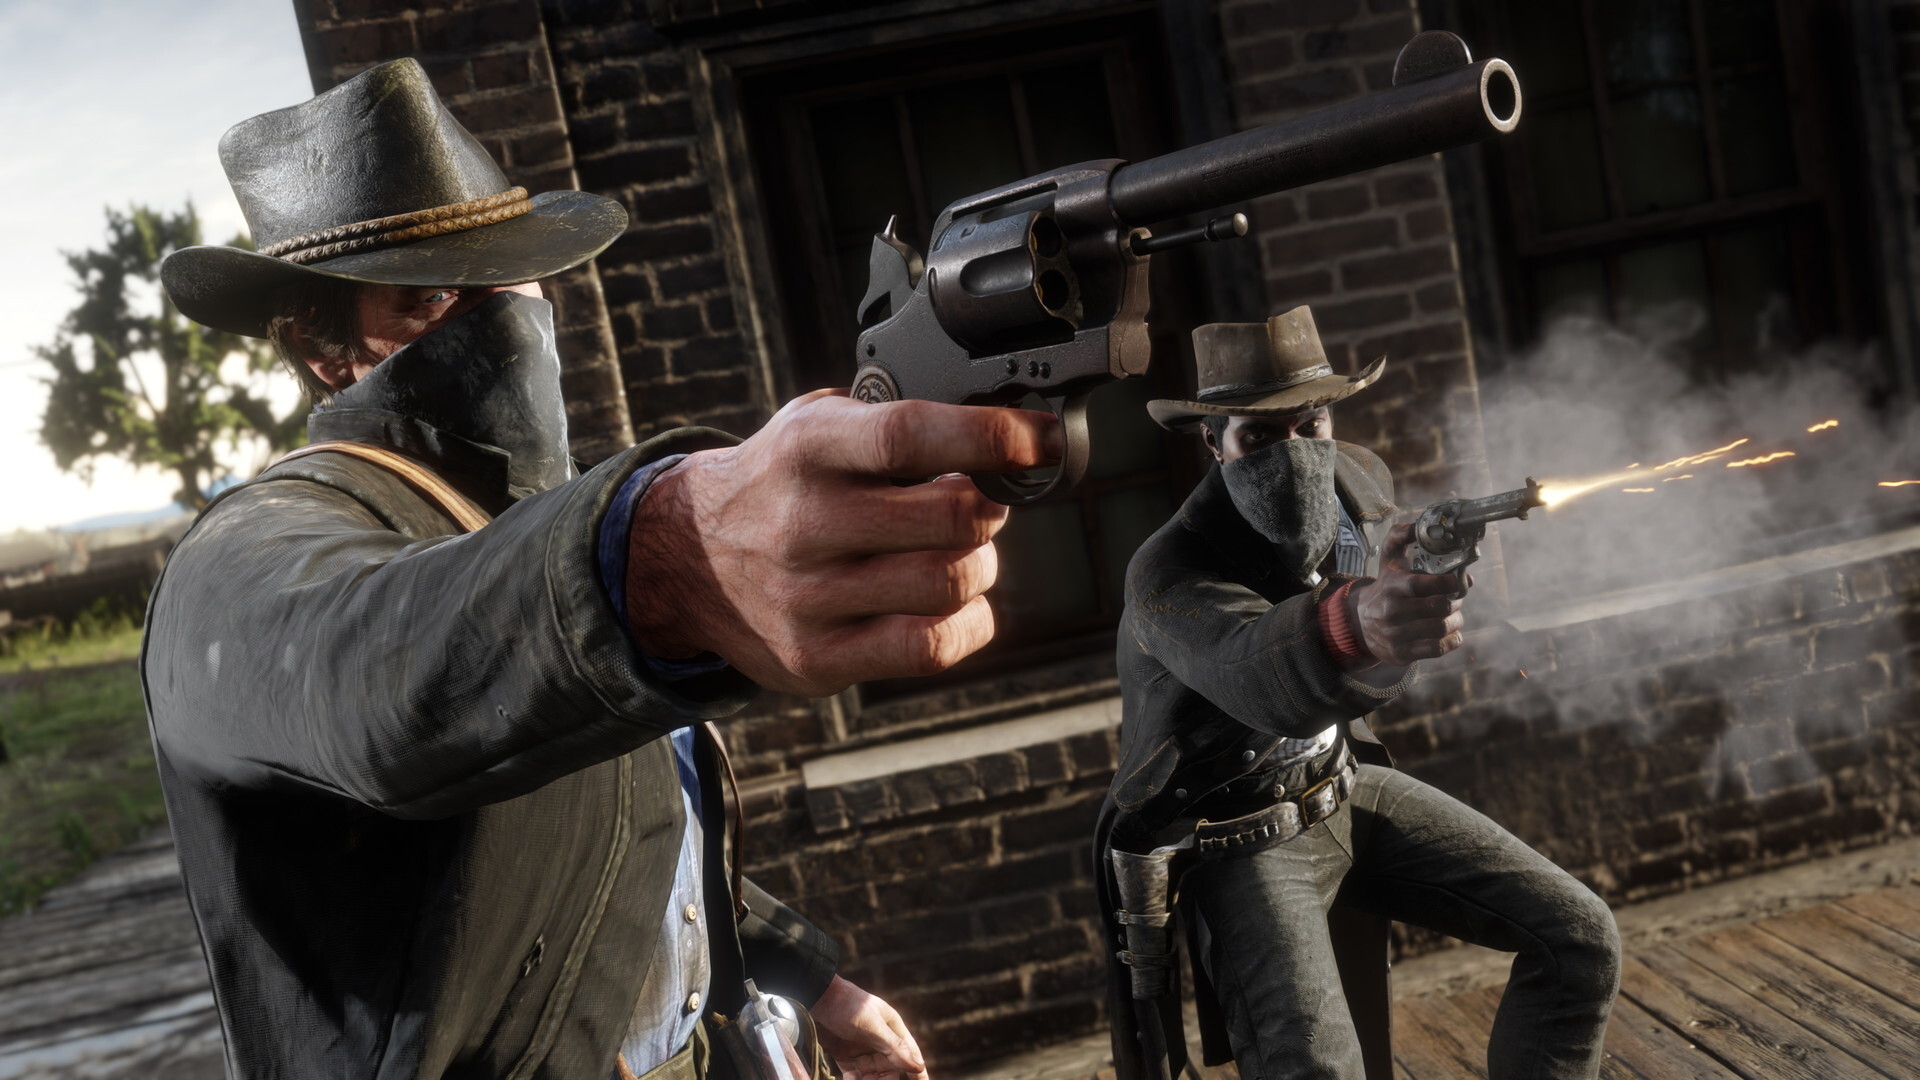 Red Dead Redemption 2 for PC - Coolblue - anything for a smile